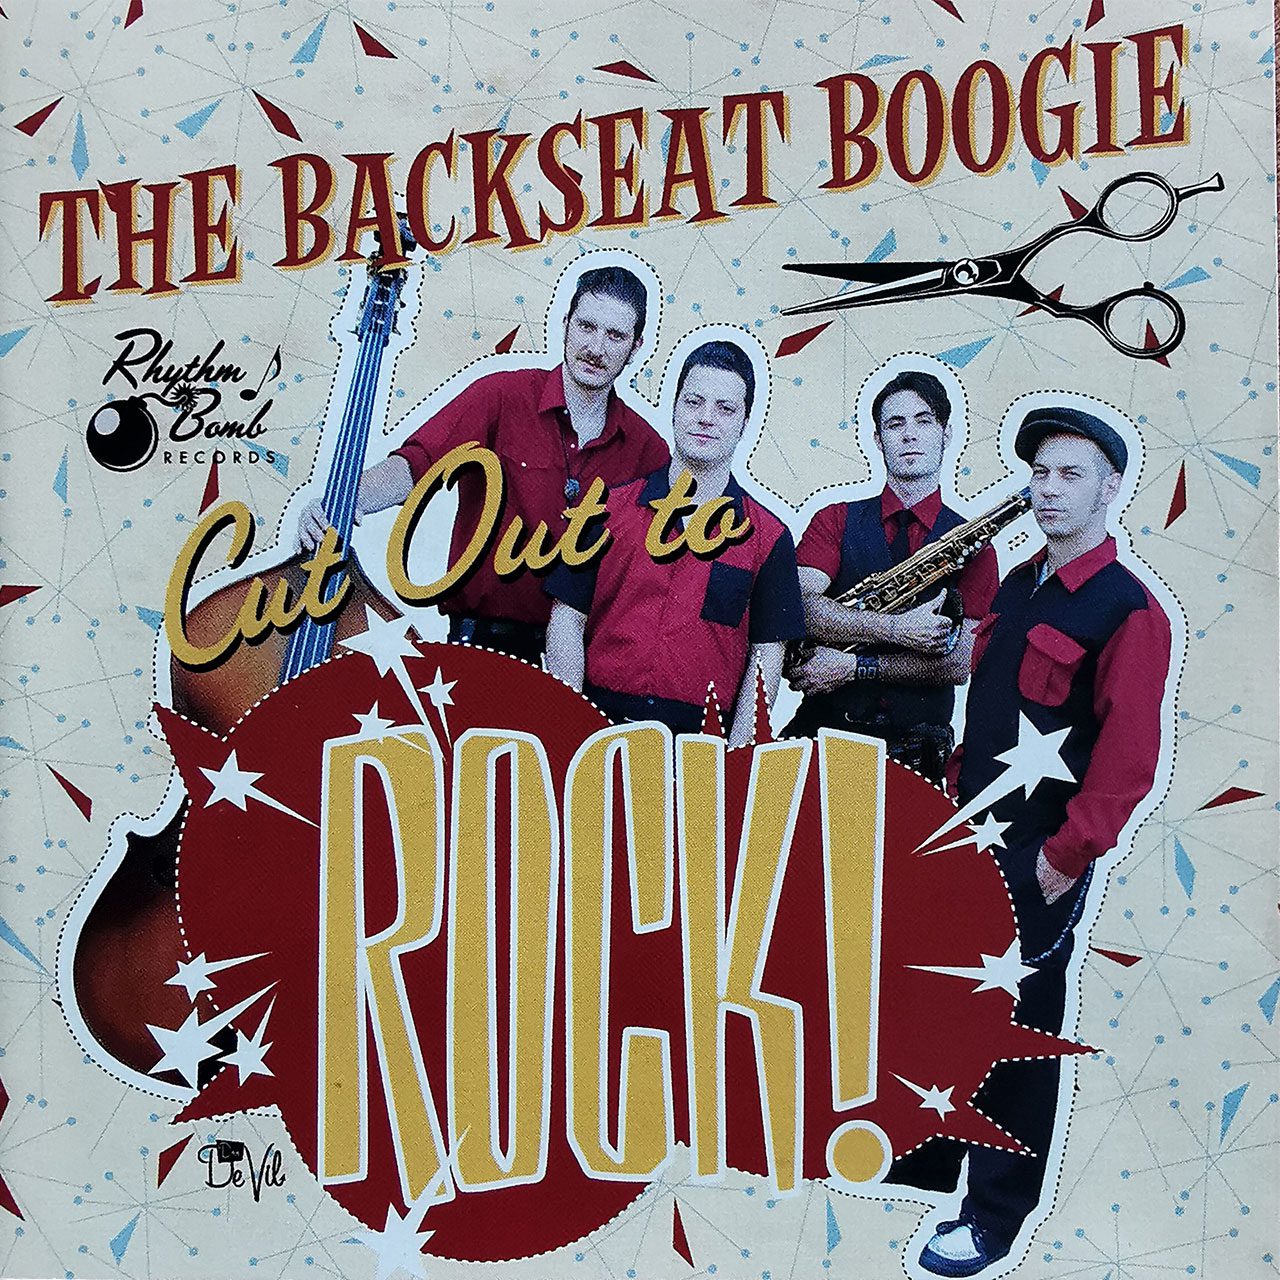 The Backseat Boogie - Cut Out To Rock cover album